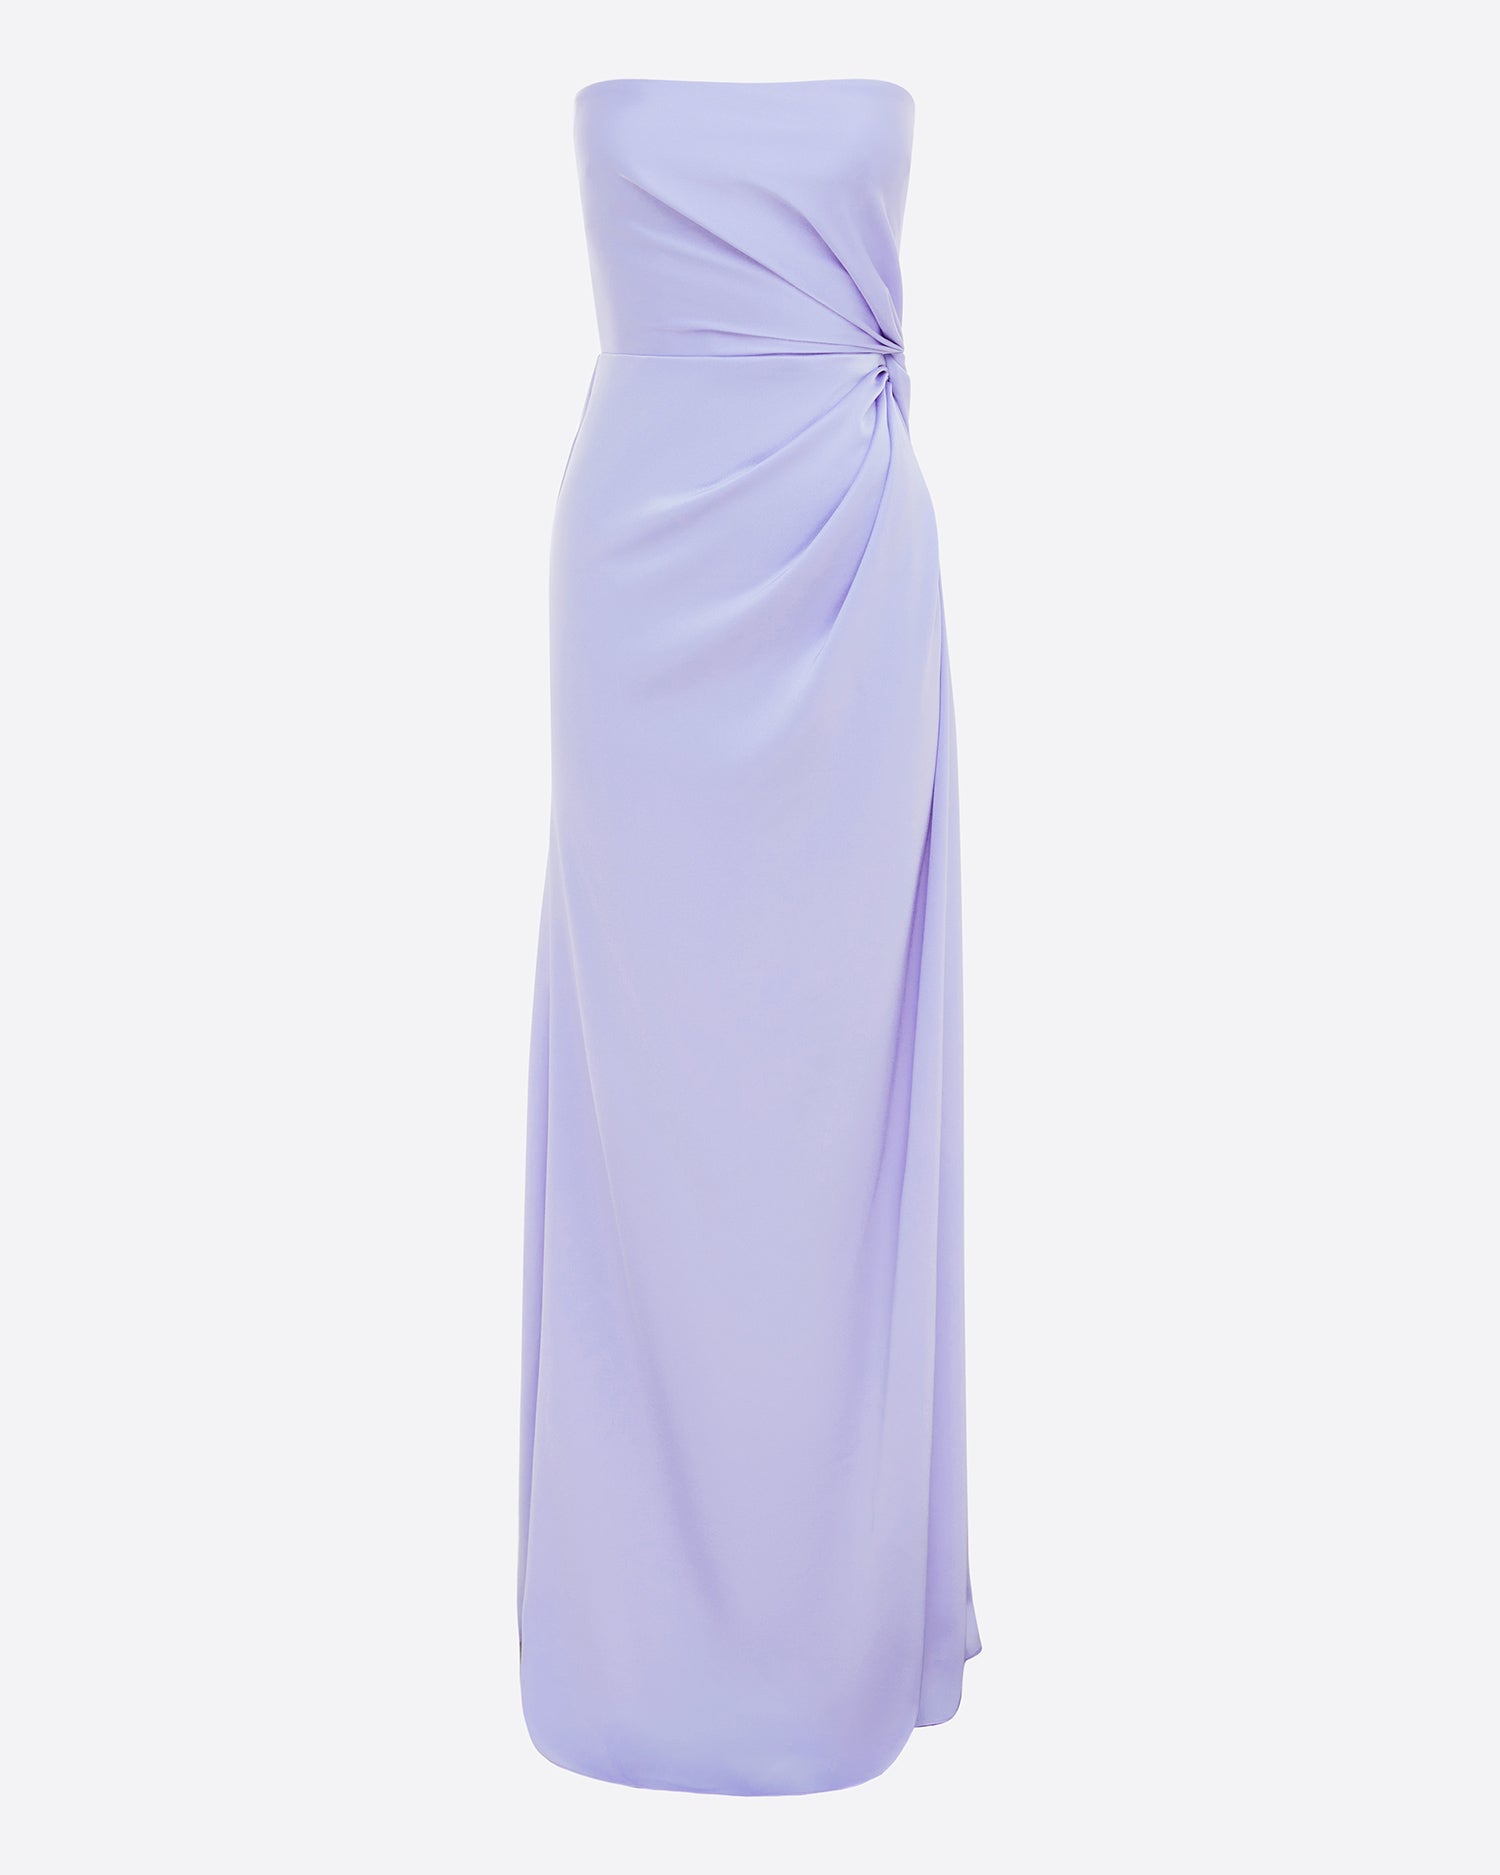 Strapless Twist Gown in Satin Crepe